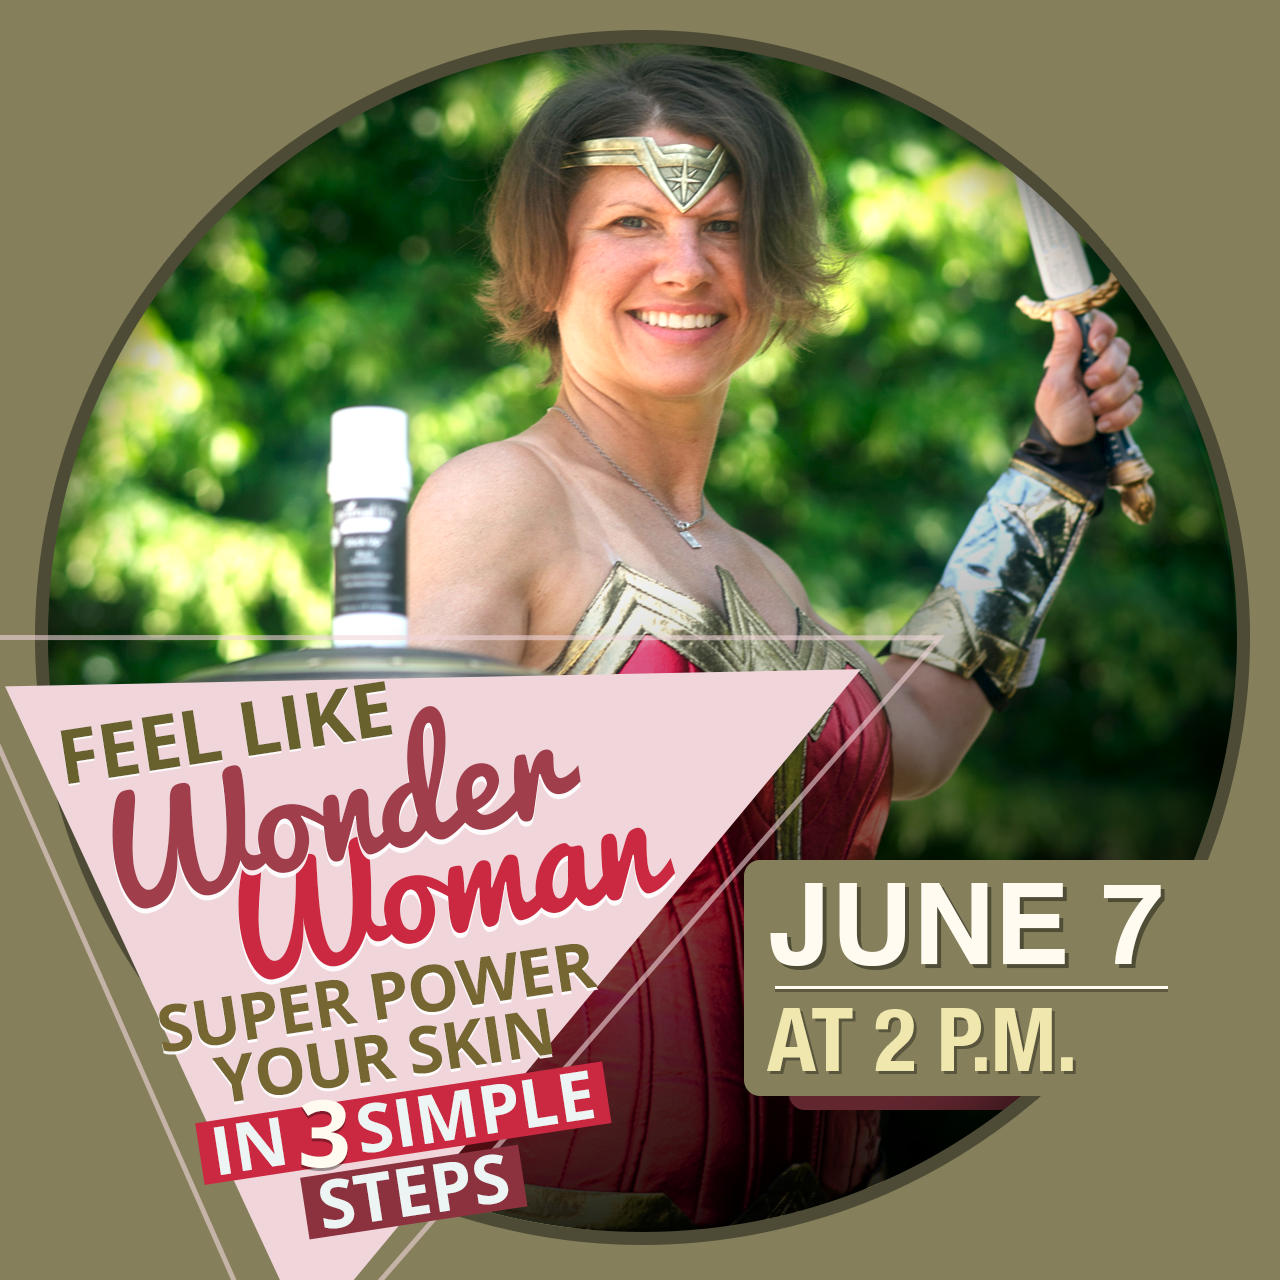 Talk With Trina: Wednesday, June 7 on Facebook Live. Topic: Feel Like Wonder Woman - Super Power your skin in 3 simple steps